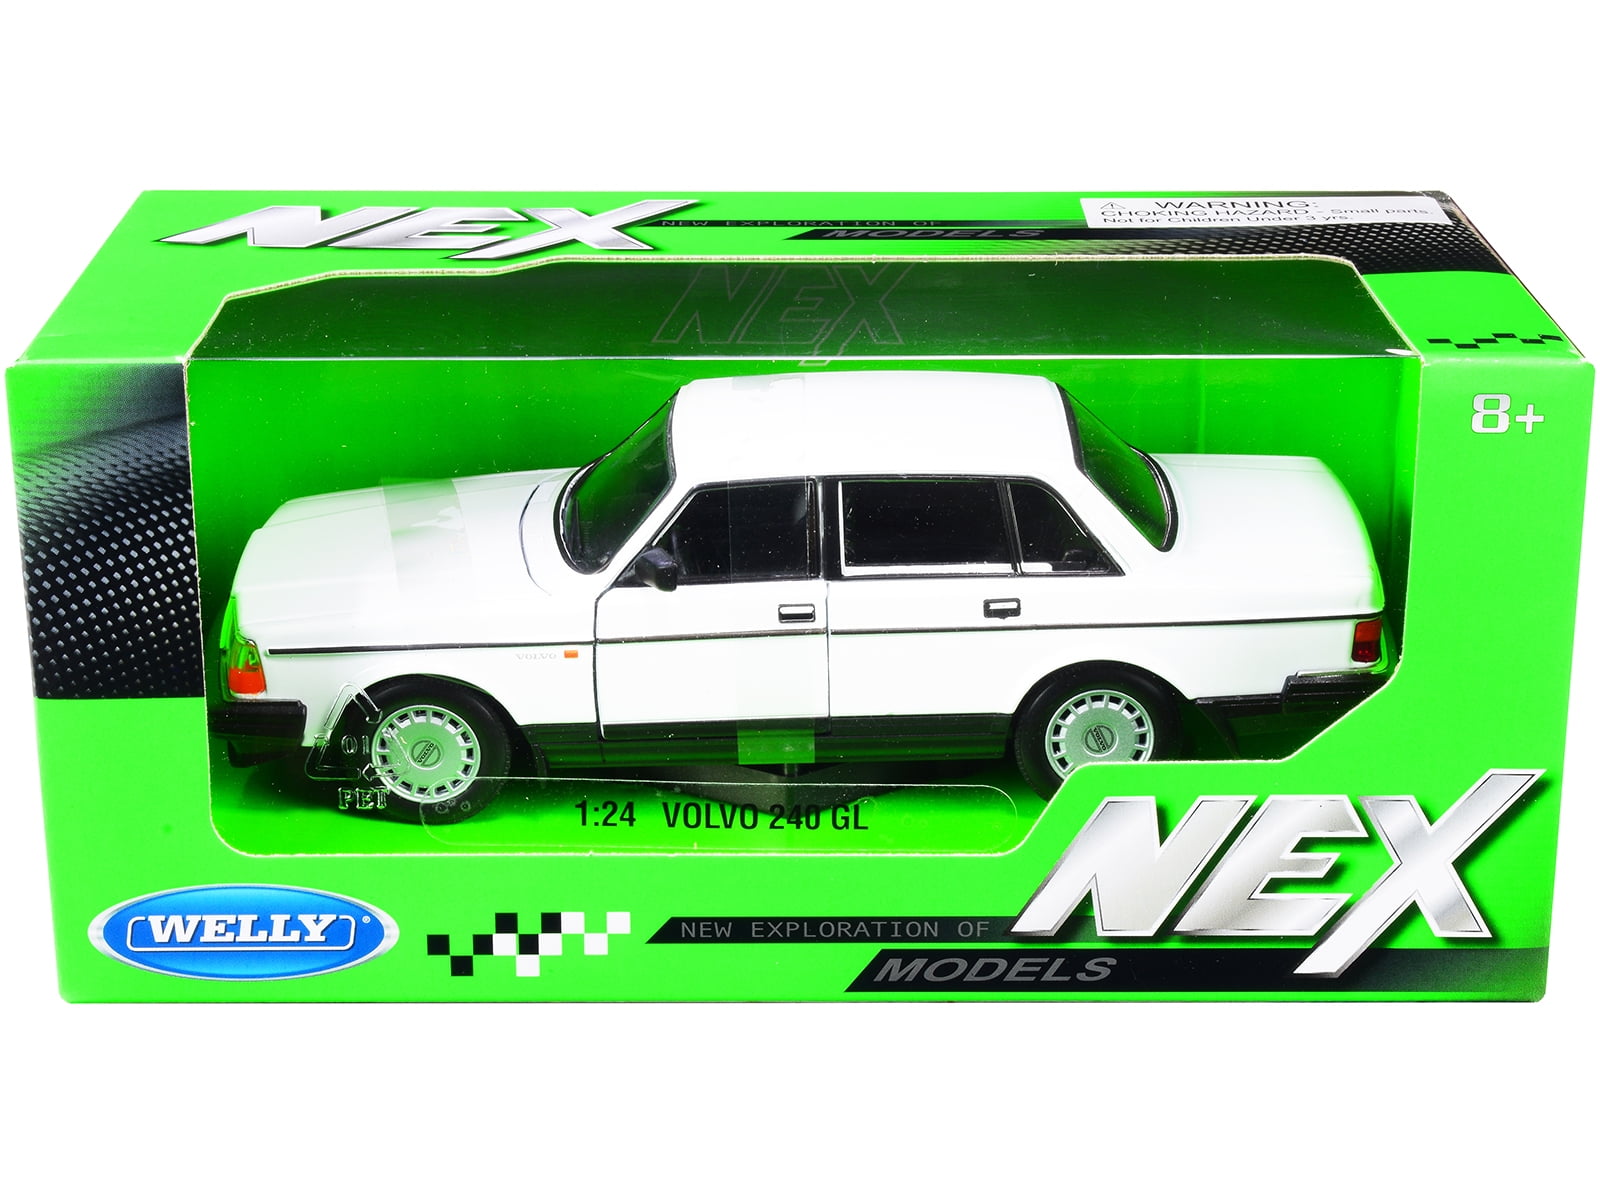 Welly Nex 1:38 Scale Die Cast Metal Classic Cars Pull Back & Go Action New Boxed 